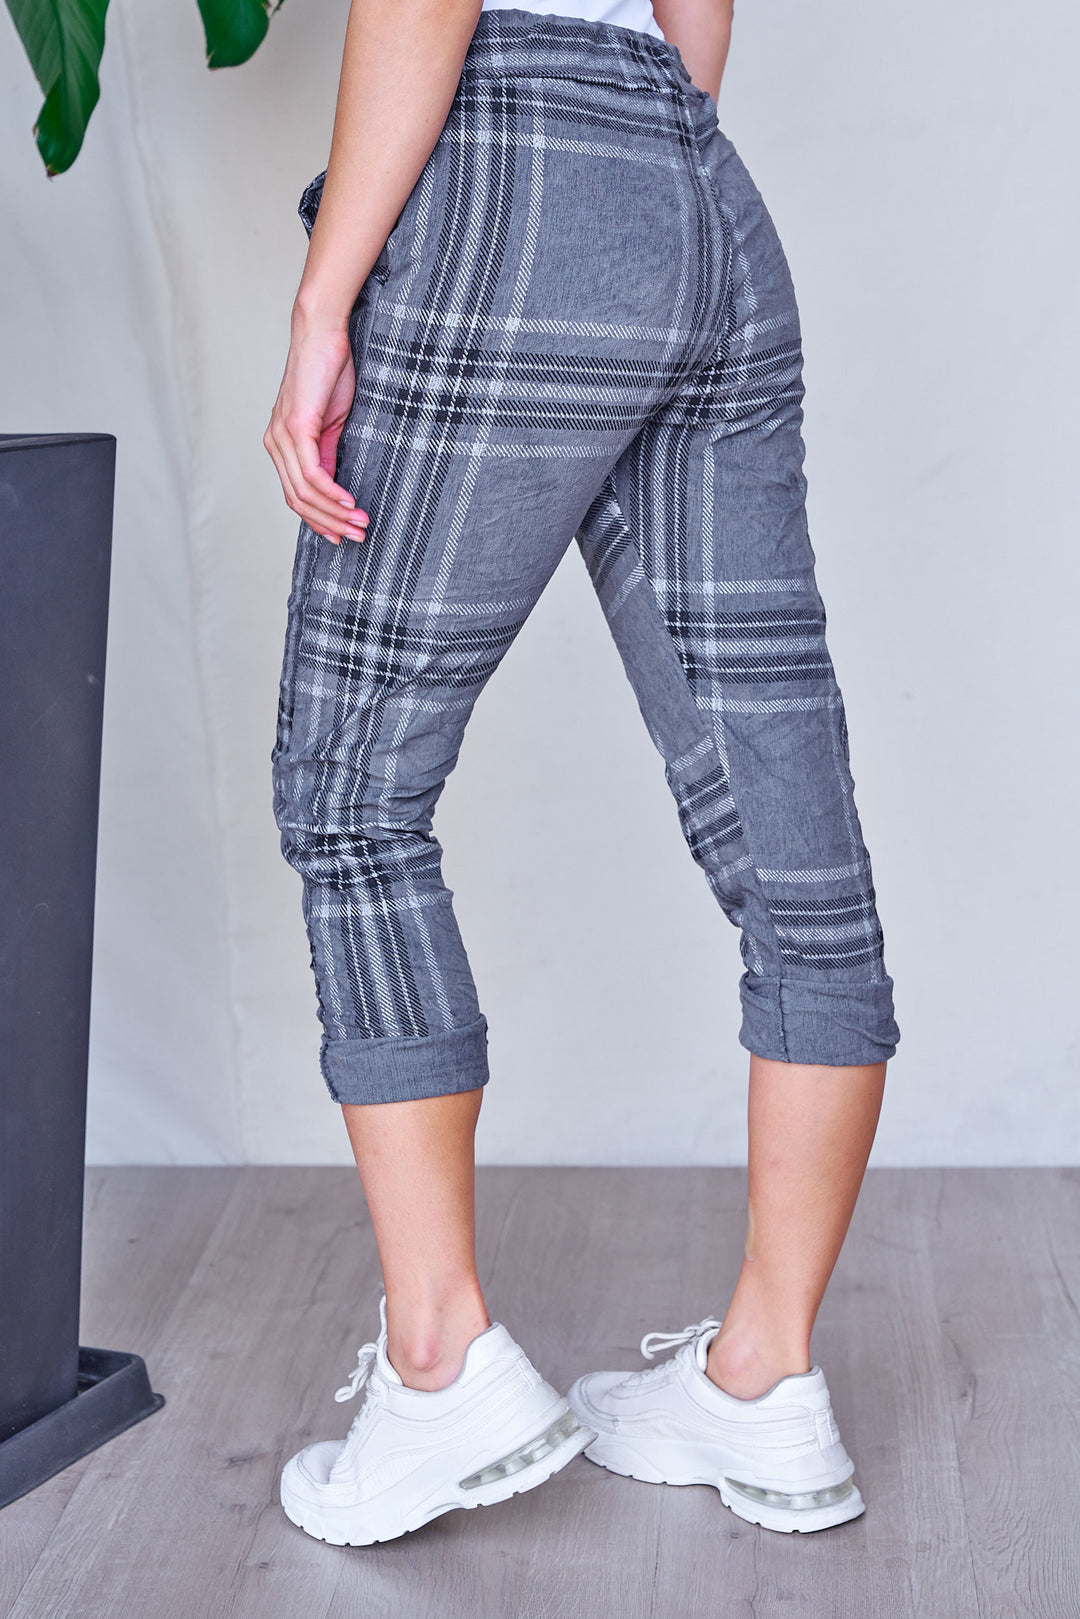 Comfy Plaid Pants with Pockets made in Italy